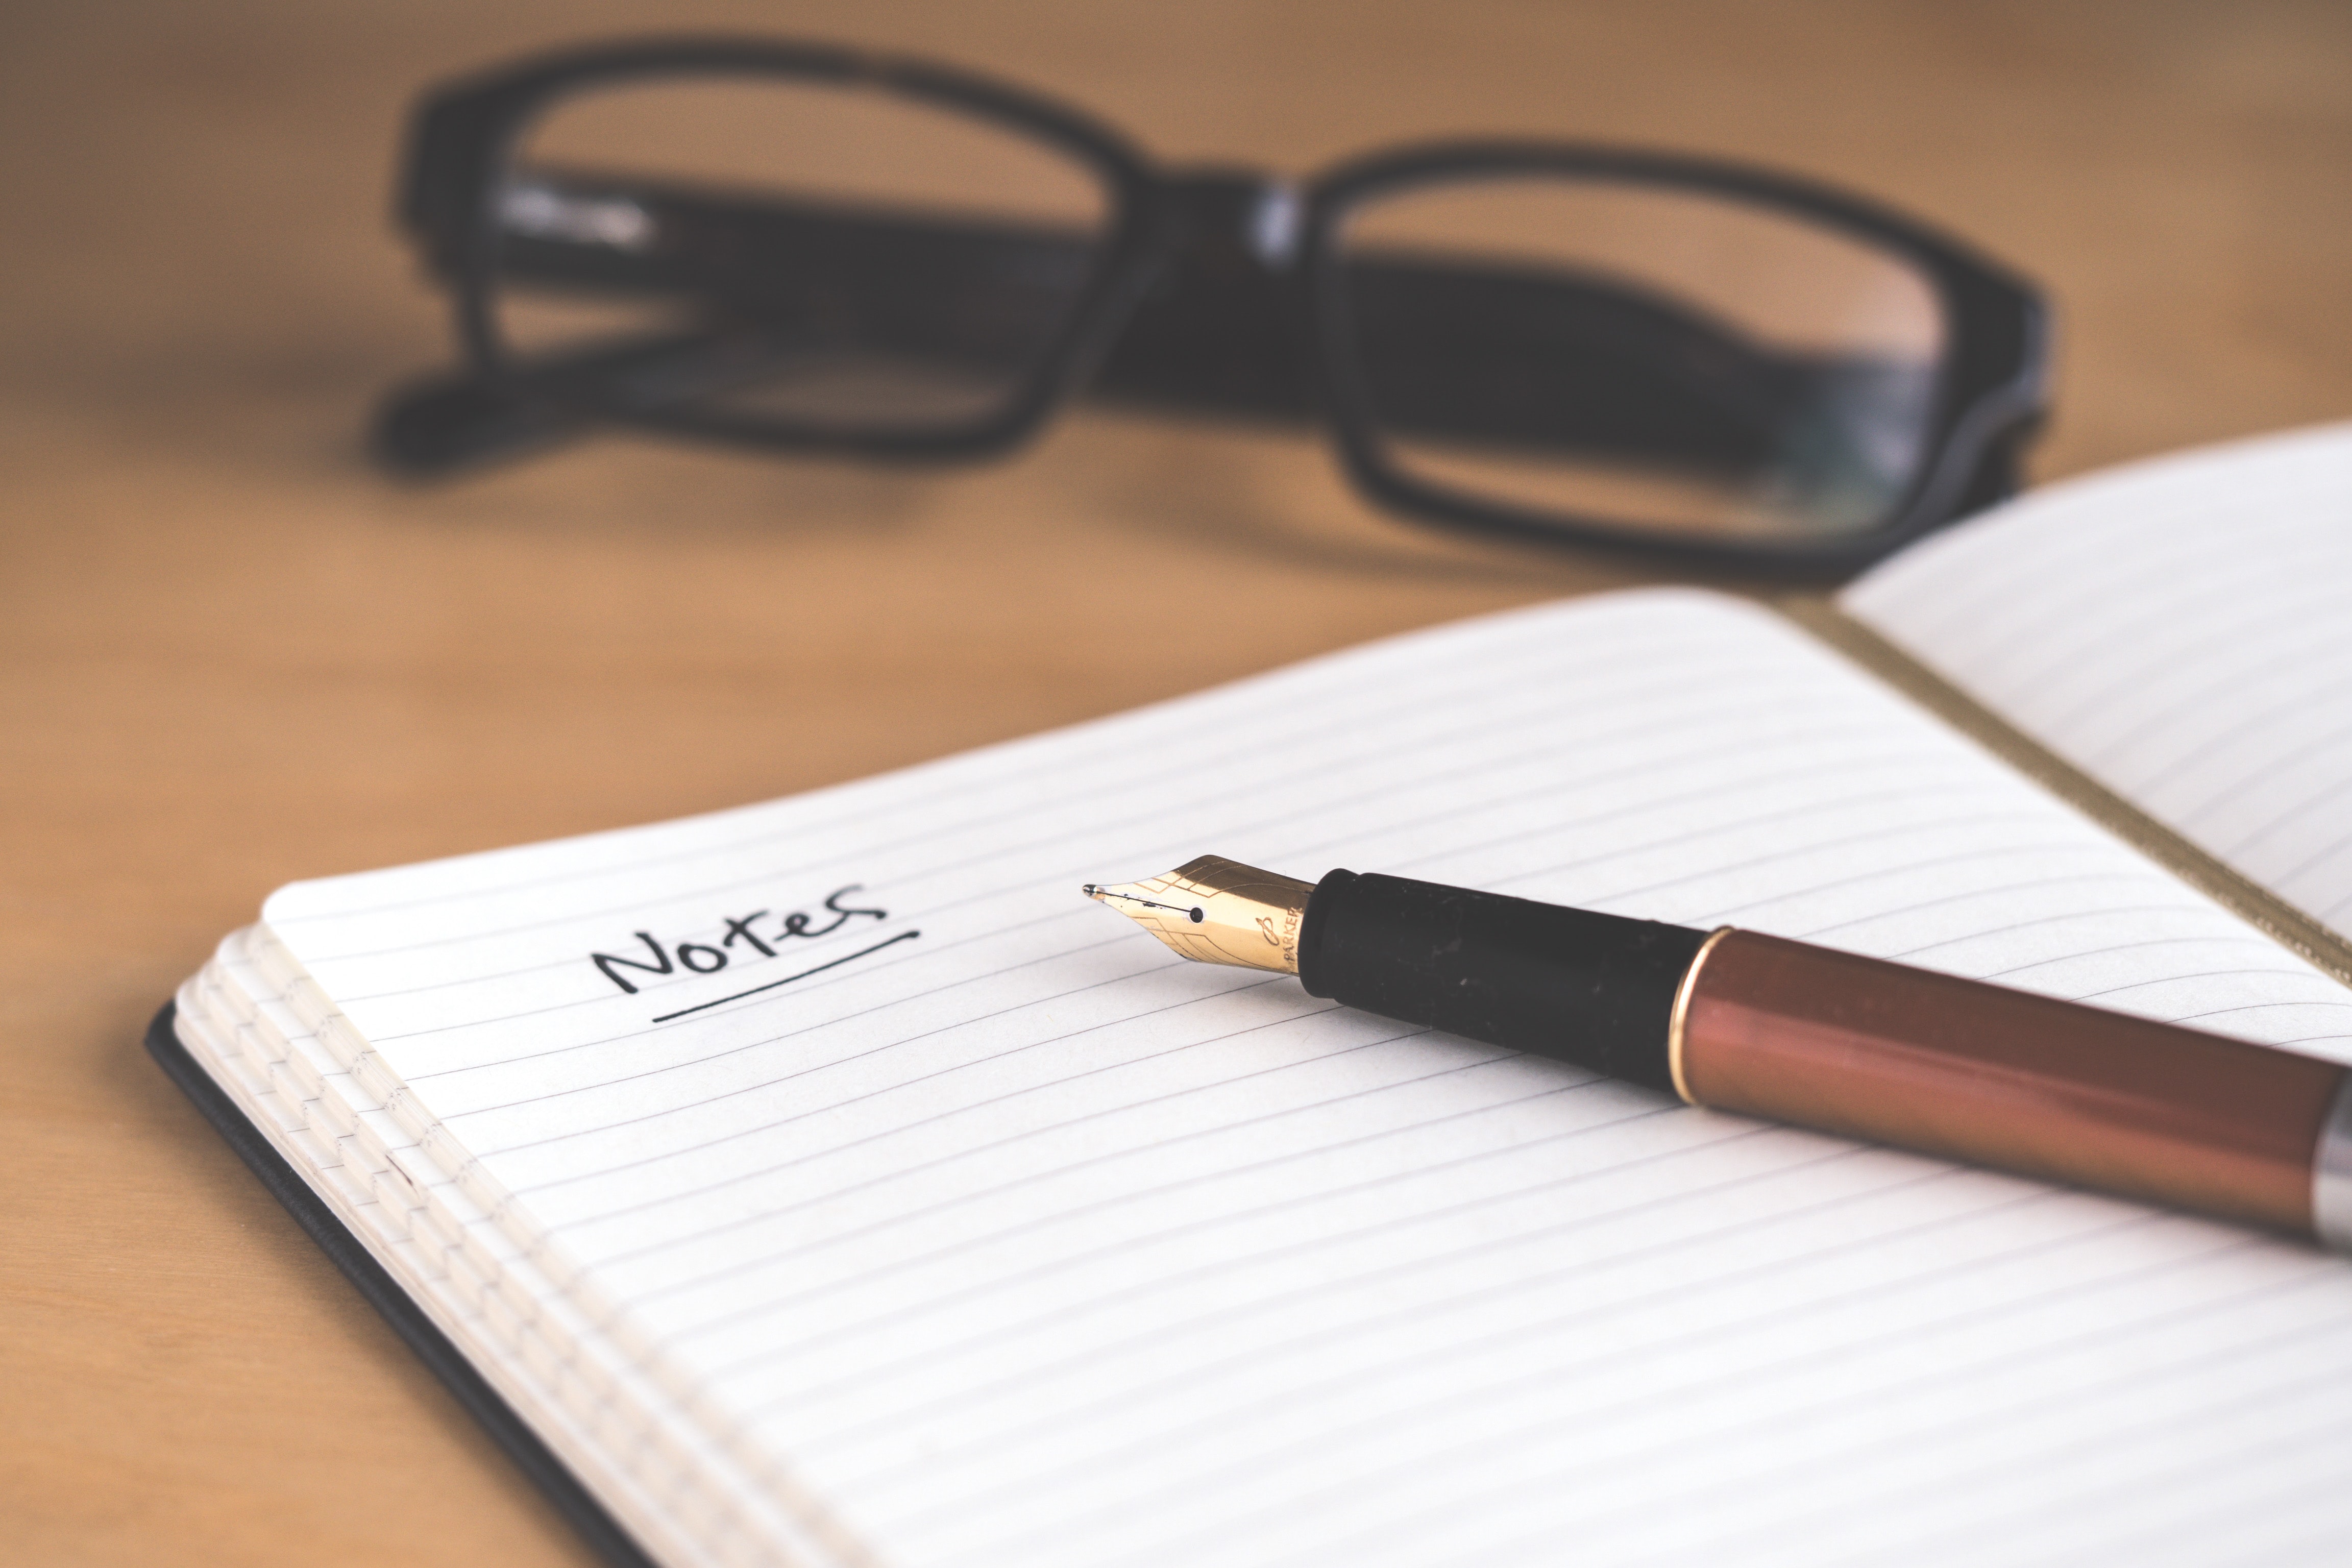 Taking notes during meetings or interviews is critical, but can be challenging. Here are 8 principles for quick and effective note-taking, including highlighting and reviewing.